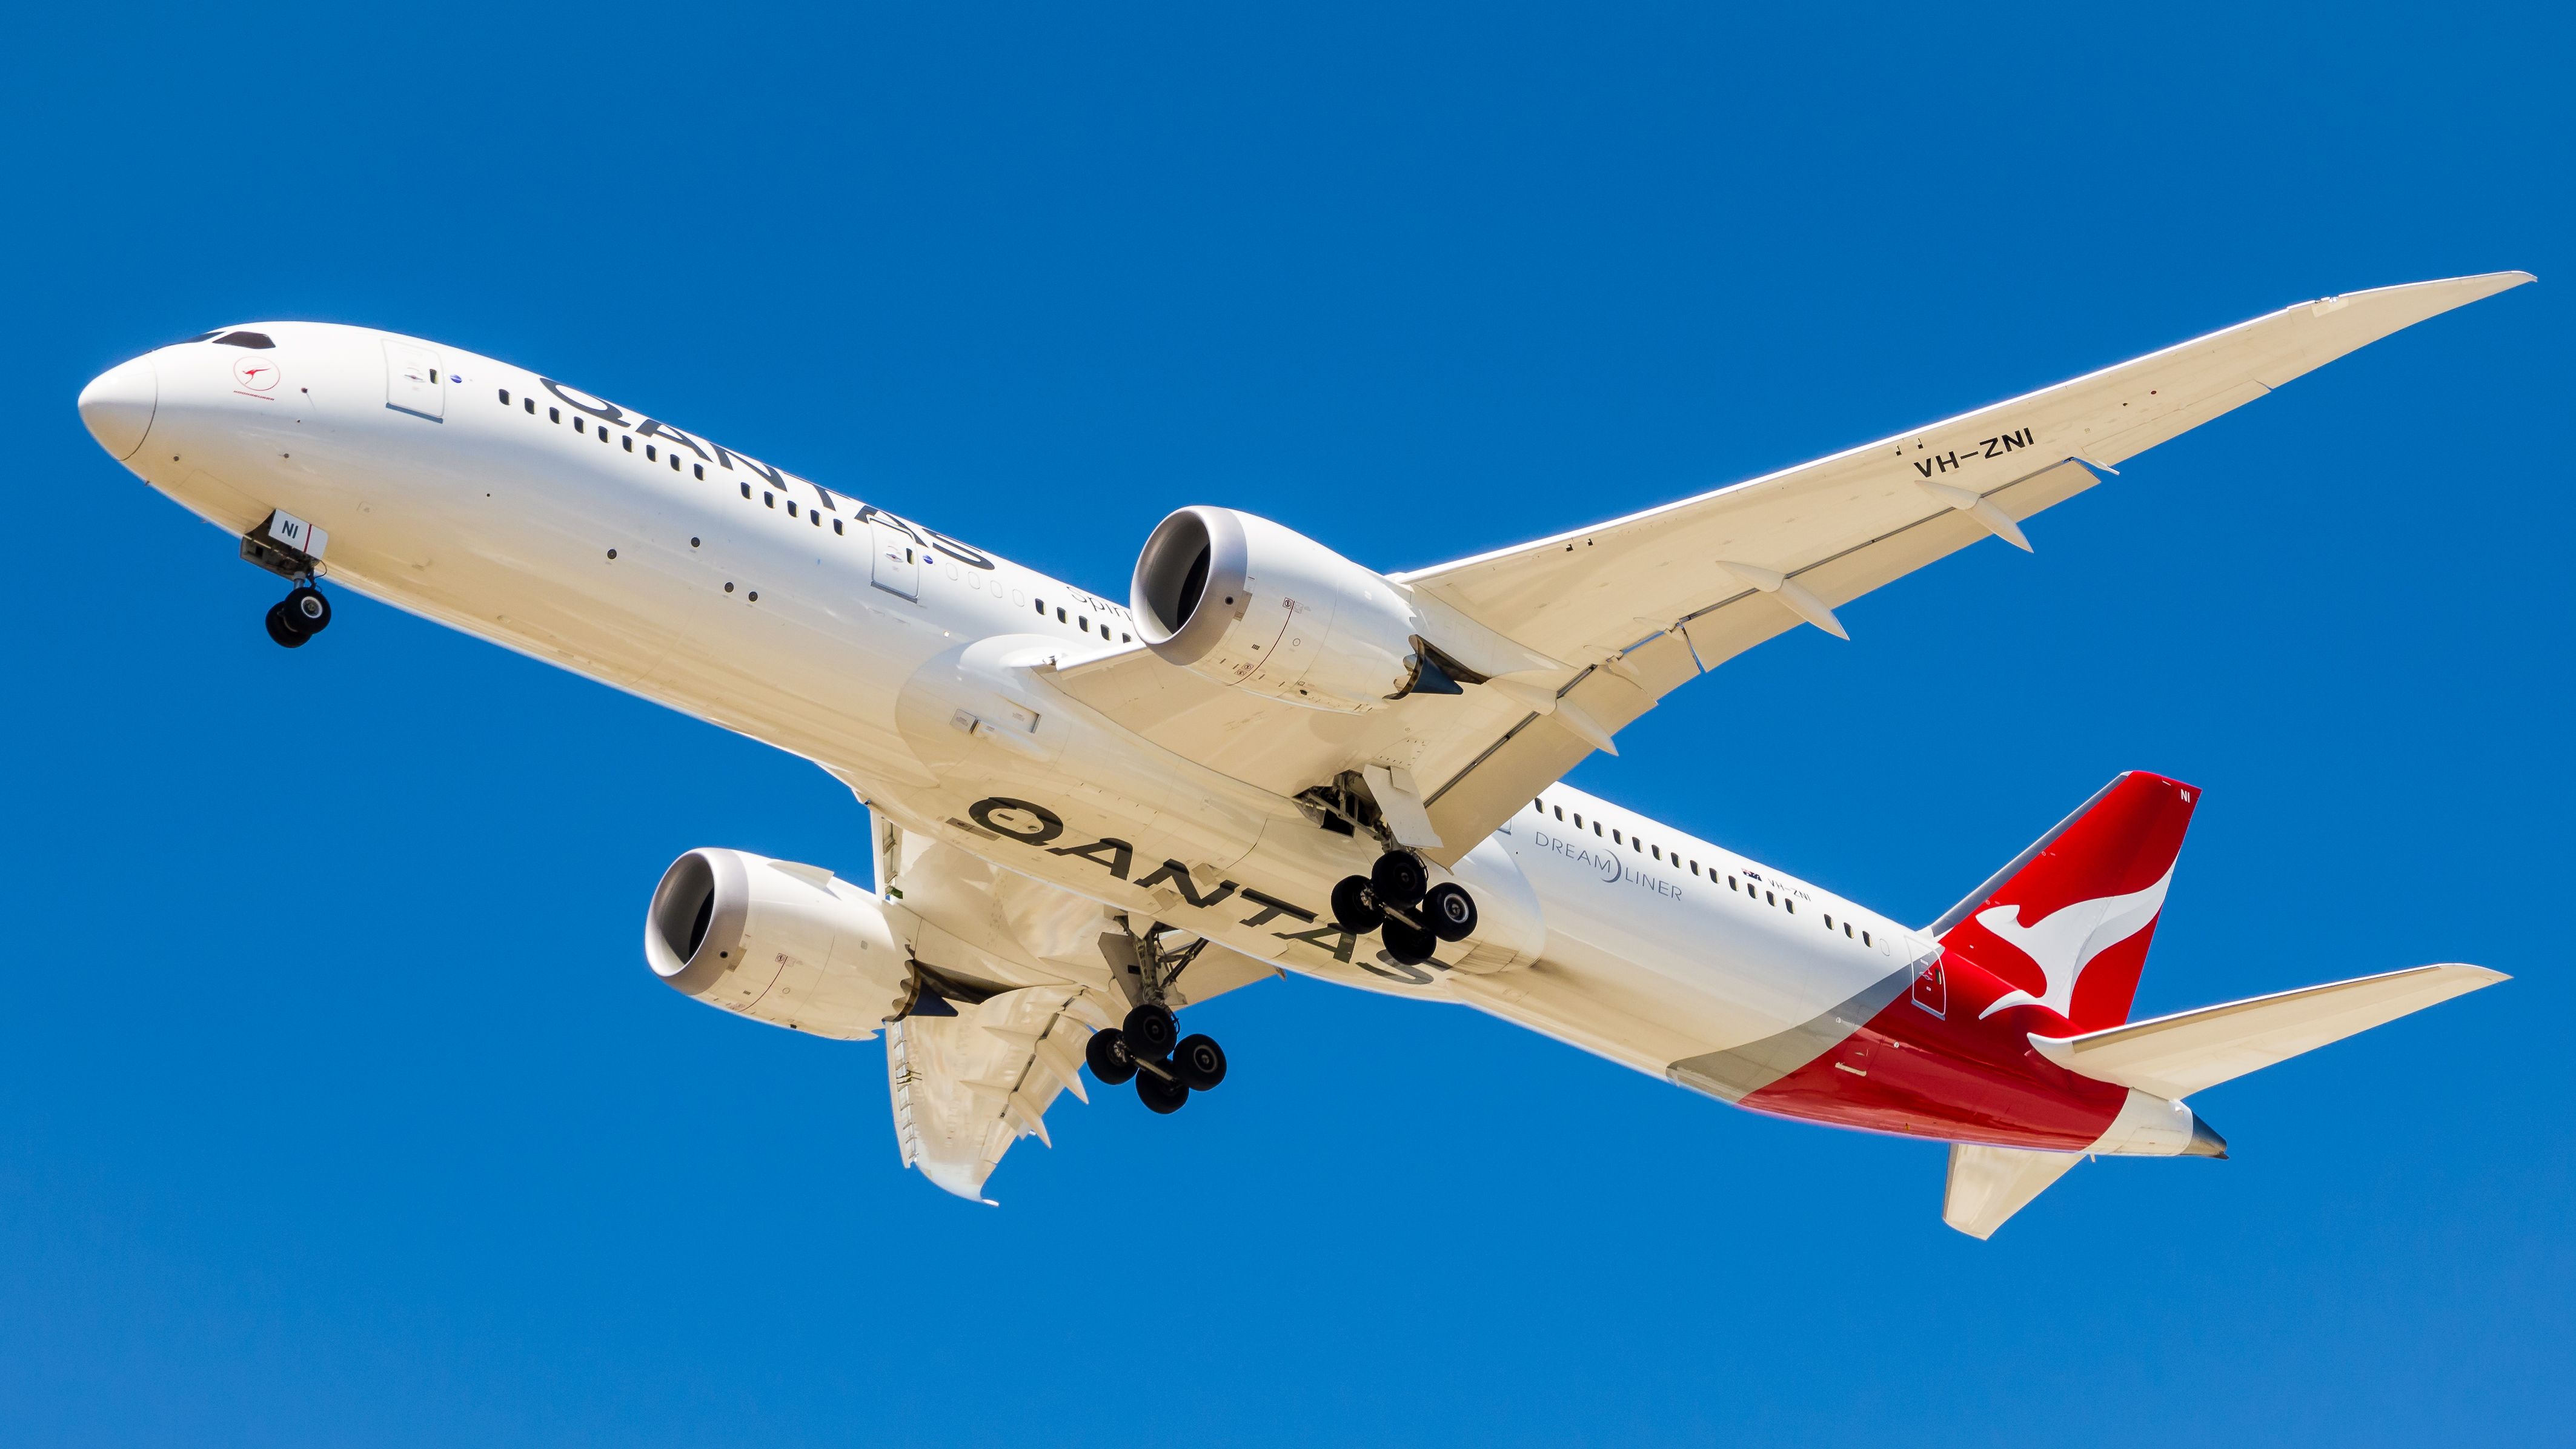 A Qantas Boeing 787-9 flying in the sky.